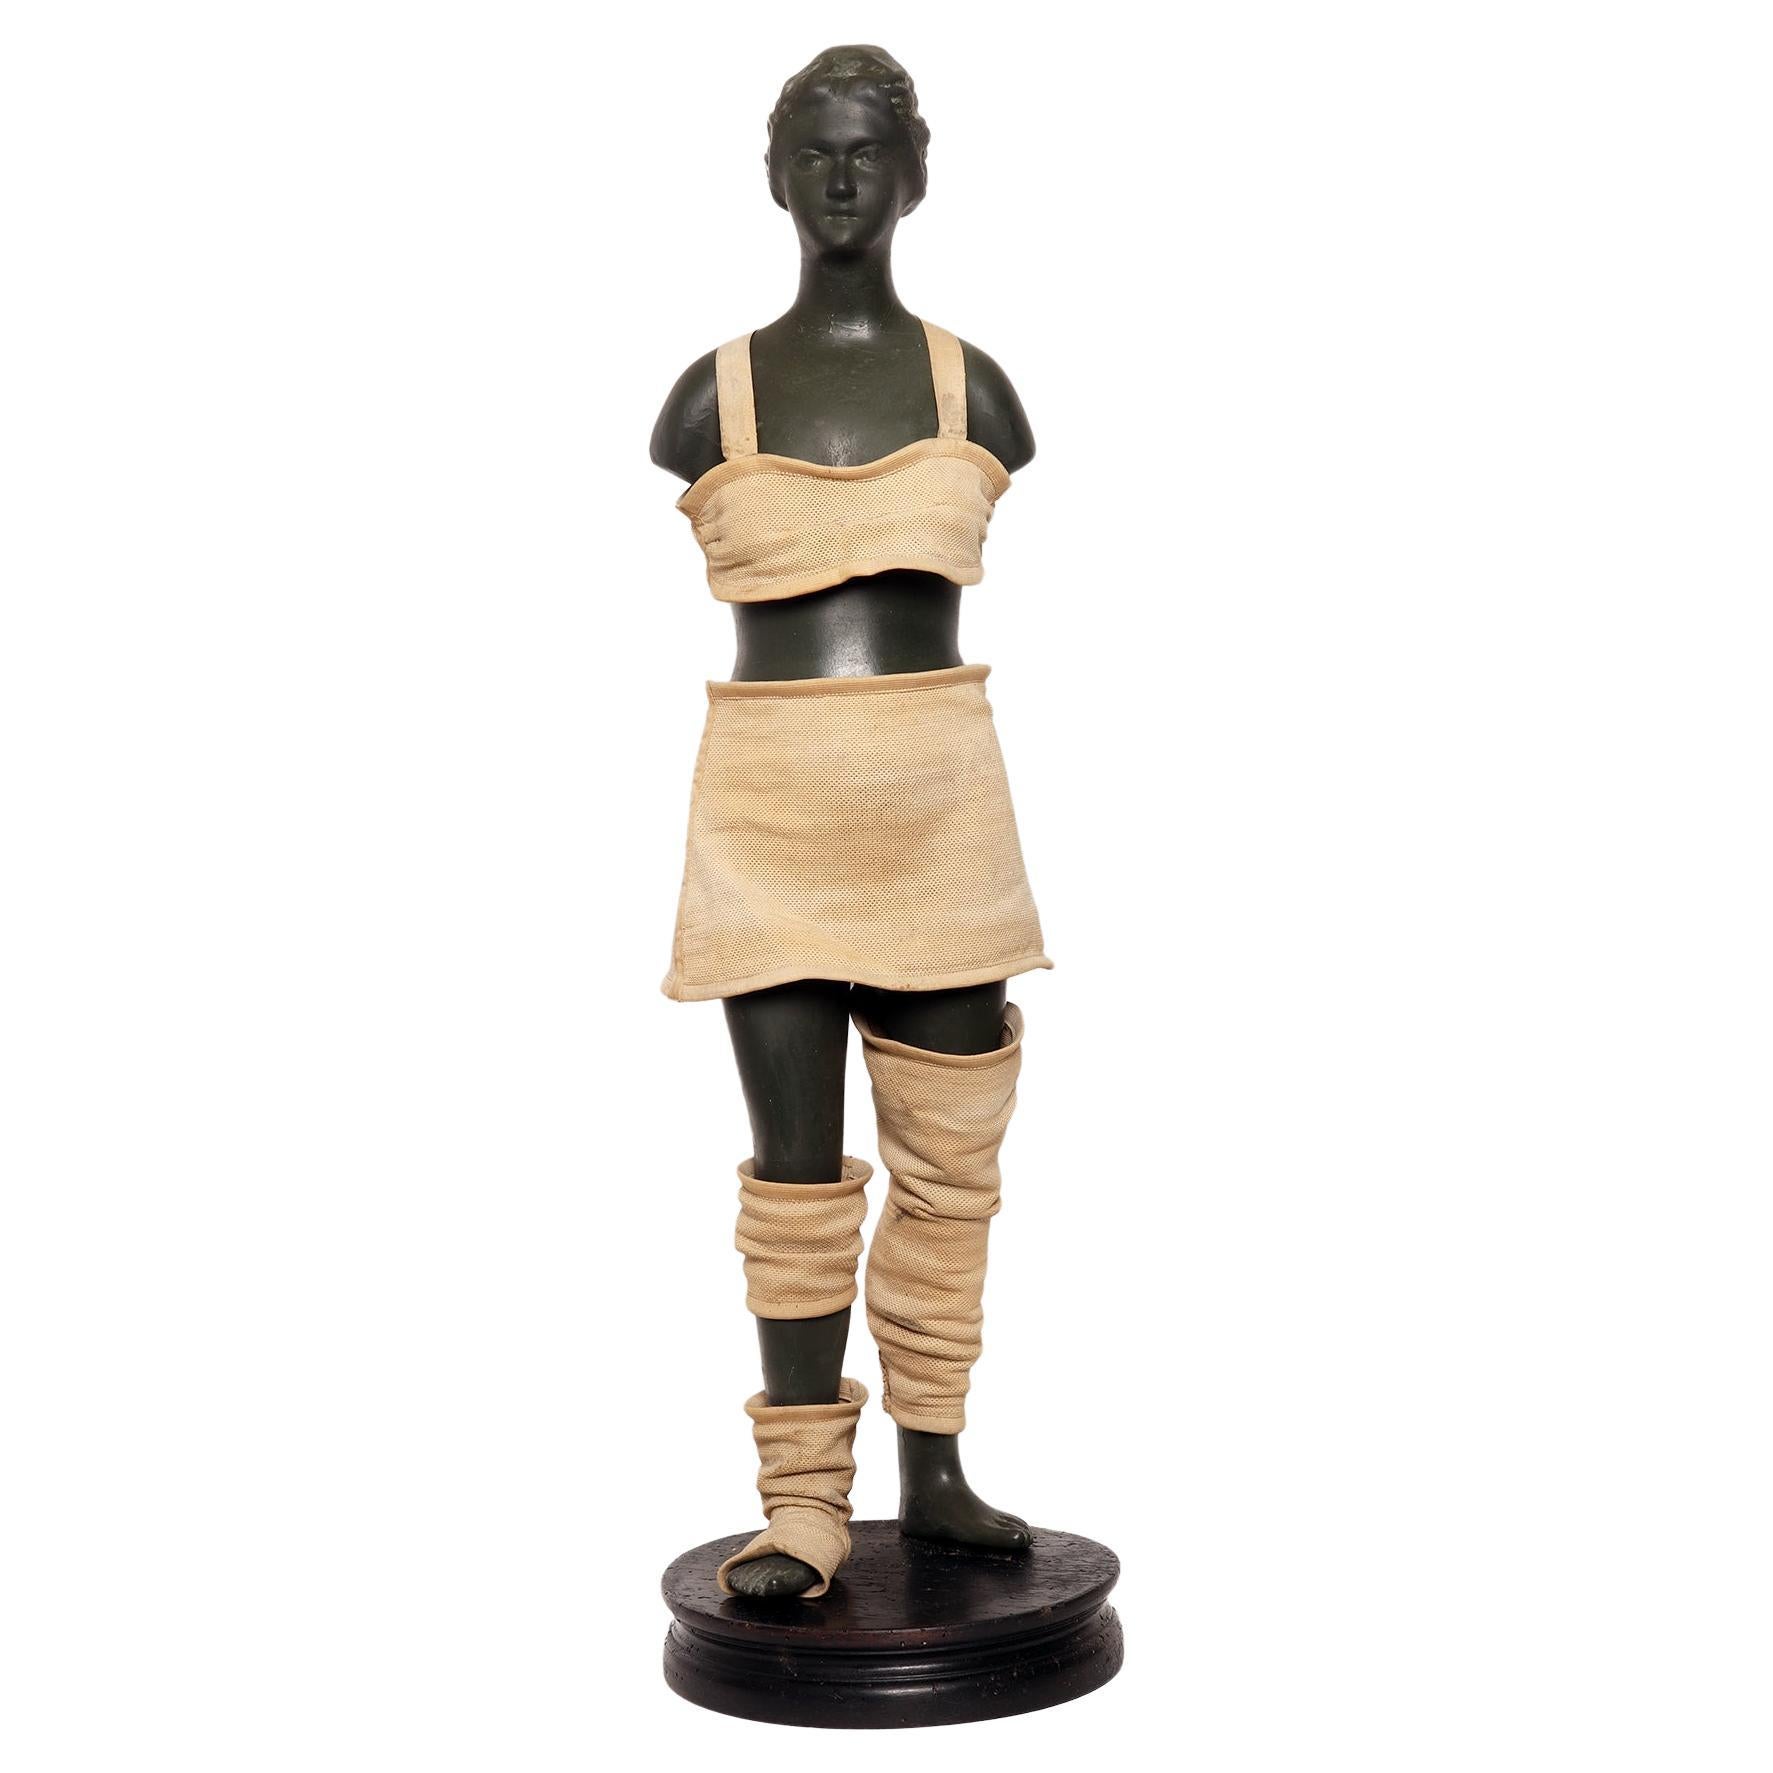 Advertising mannequin for elastic and containment belts, France 1920.